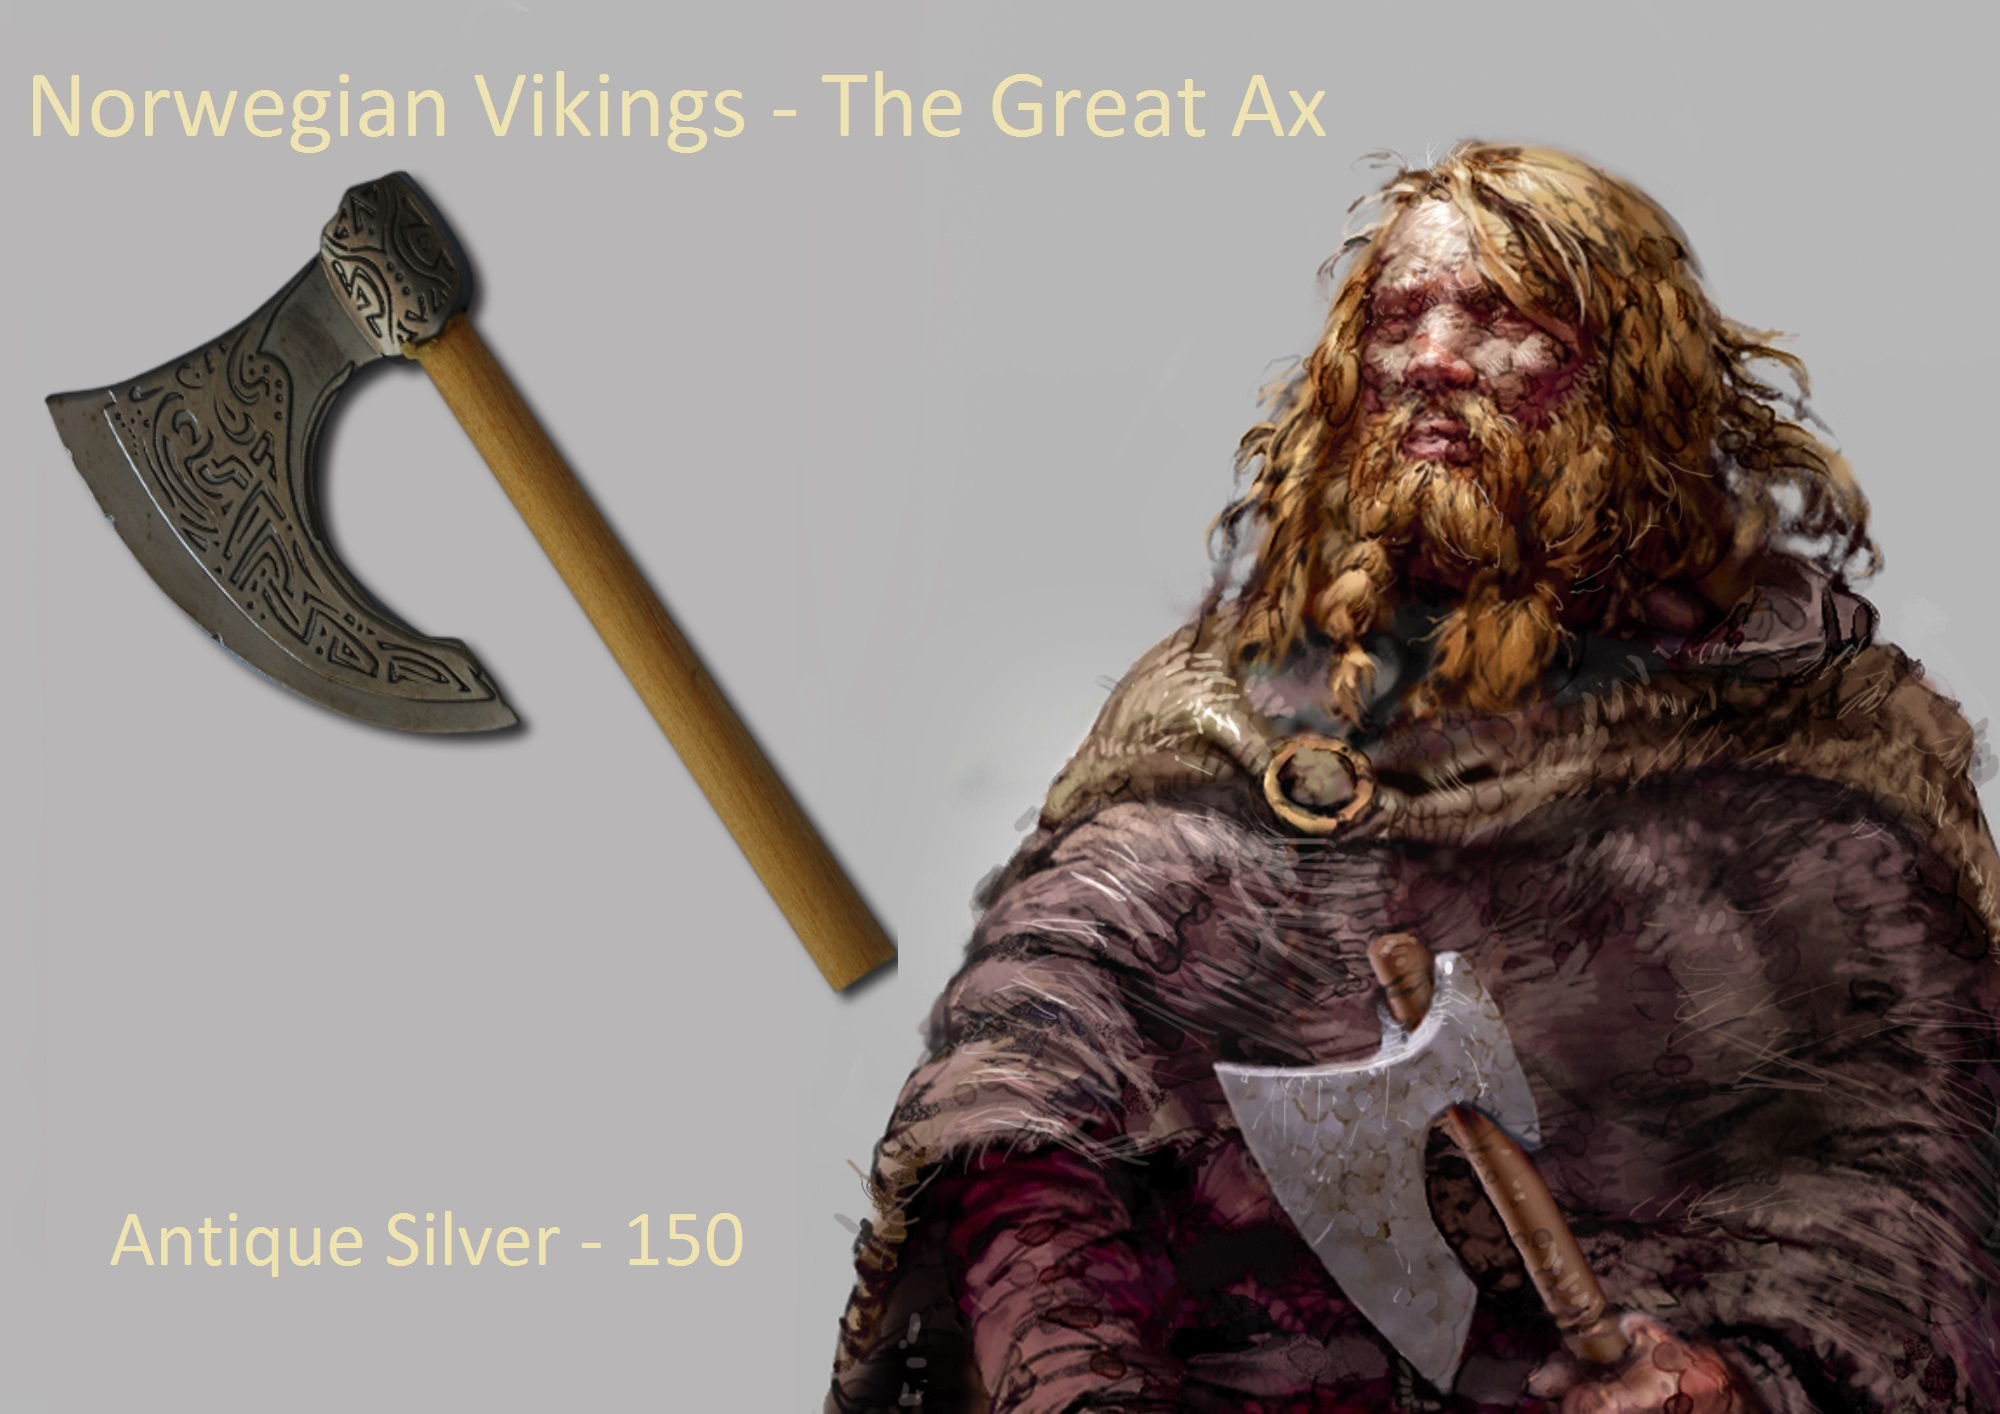 The Great Ax - Antique Silver.jpg